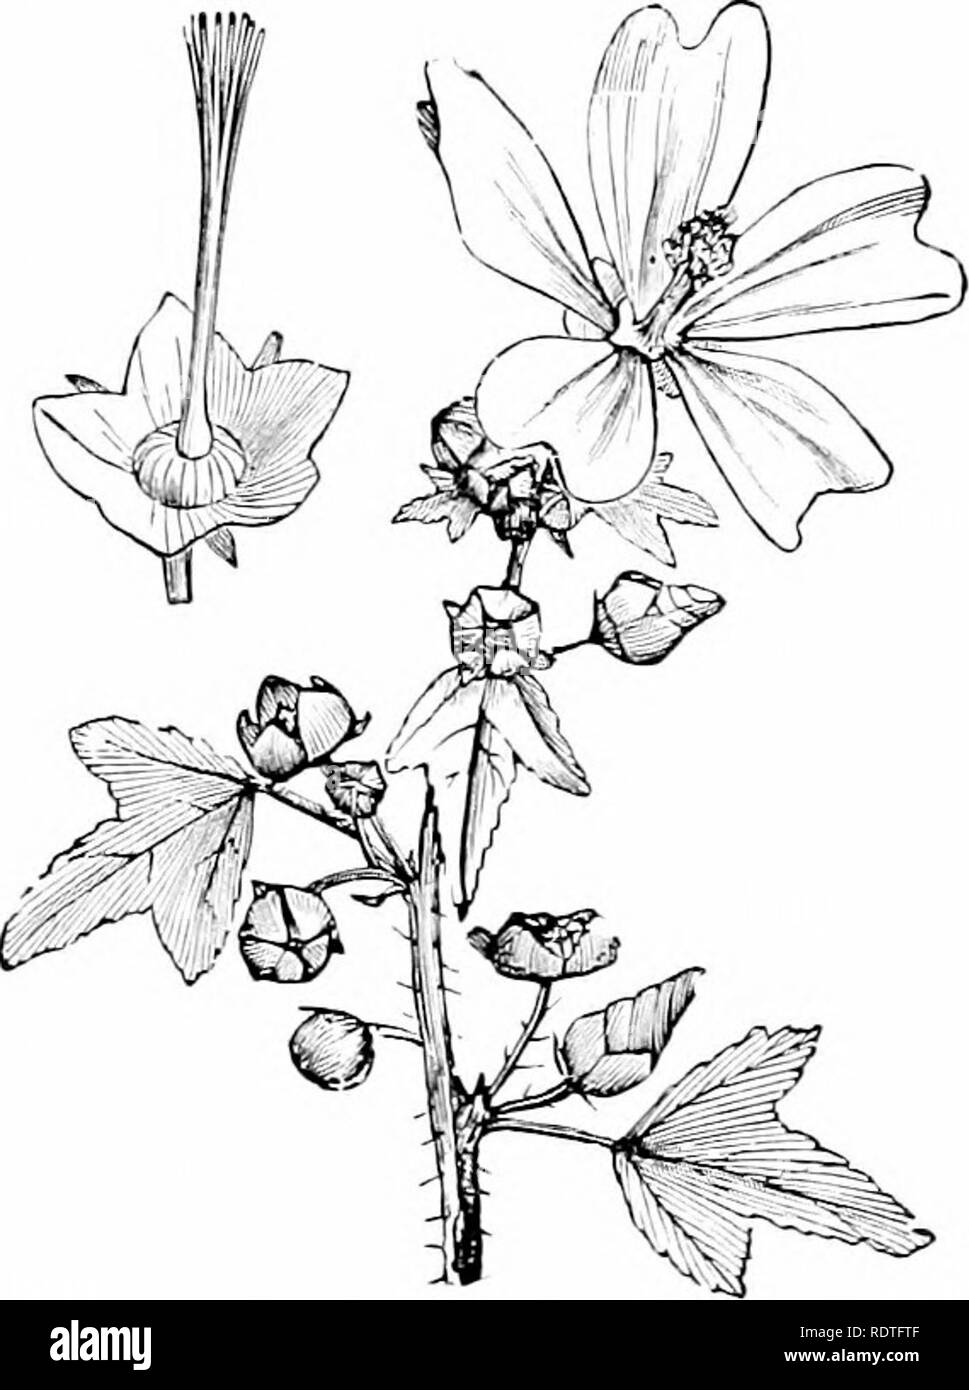 . Plants and their ways in South Africa. Botany; Botany. I'^IG. 309.âHibisi:i/s. I. Corolla, with petals adherent to monadclphous stamens. II. Diagram. (tYom Edmonds and Marloth's &quot;Elementary Botany for South .Africa &quot;.) a. laiviiiuis, Willd., and II. ludwigii, E. and Z., are tall shrubs. Fig. â y.o.âMnlva. I. Portion of plant (reduced). II. Pistil. (From Thome and Bennett's &quot; Structural and Physiological Botany&quot;.) with large yellow flowers and dark purple centres. Some species are low herbs with smaller flowers. iMve pointed teeth. Please note that these images are extract Stock Photo